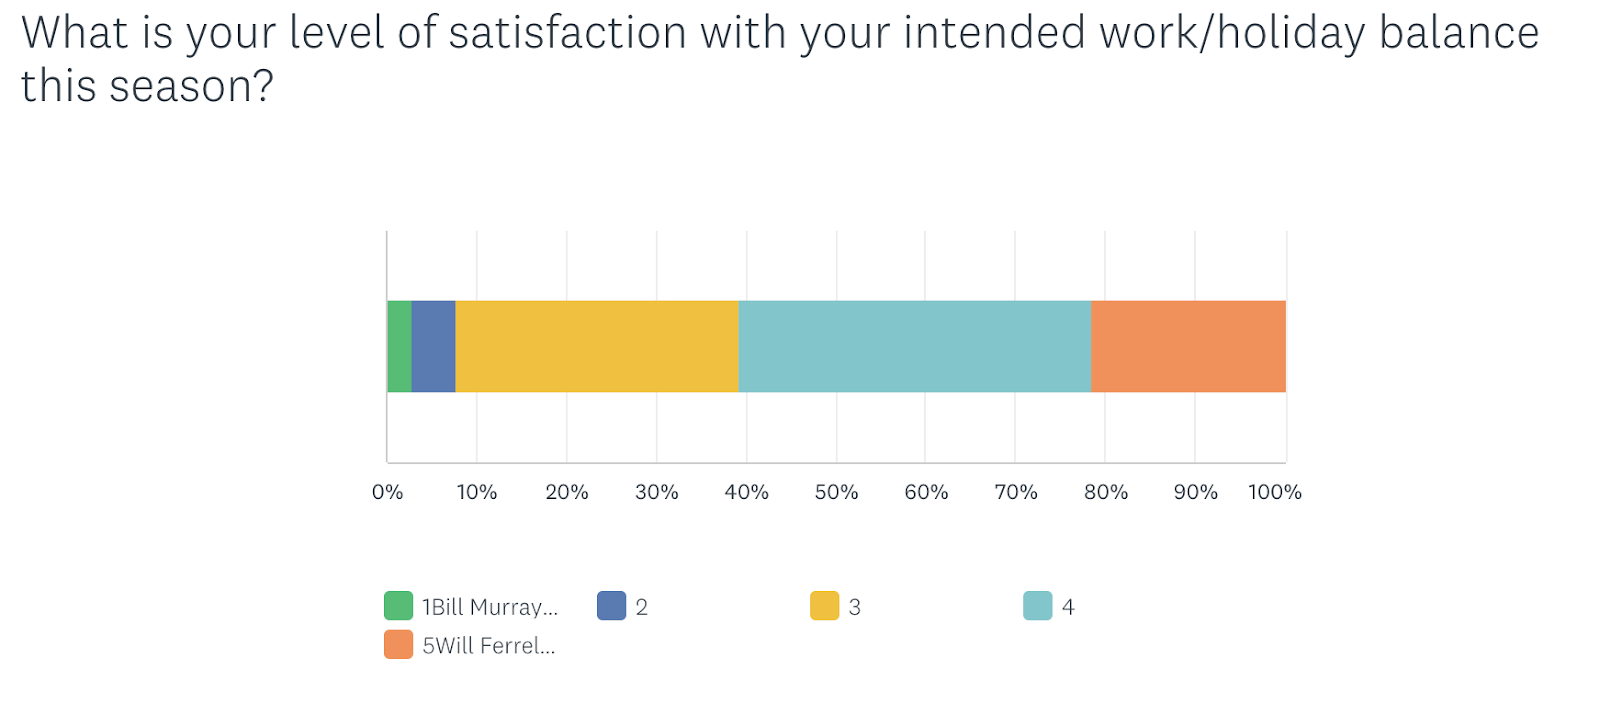 "What is your level of satisfaction with your intended work/holiday balance this season?" followed by a chart showing different percentage color bars totaling 100% with less than 5% for green "1 Bill Murray...", ~5% for navy "2", ~30% for yellow "3", ~40% for teal "4", and ~21% orange "5 Will Ferrel..."